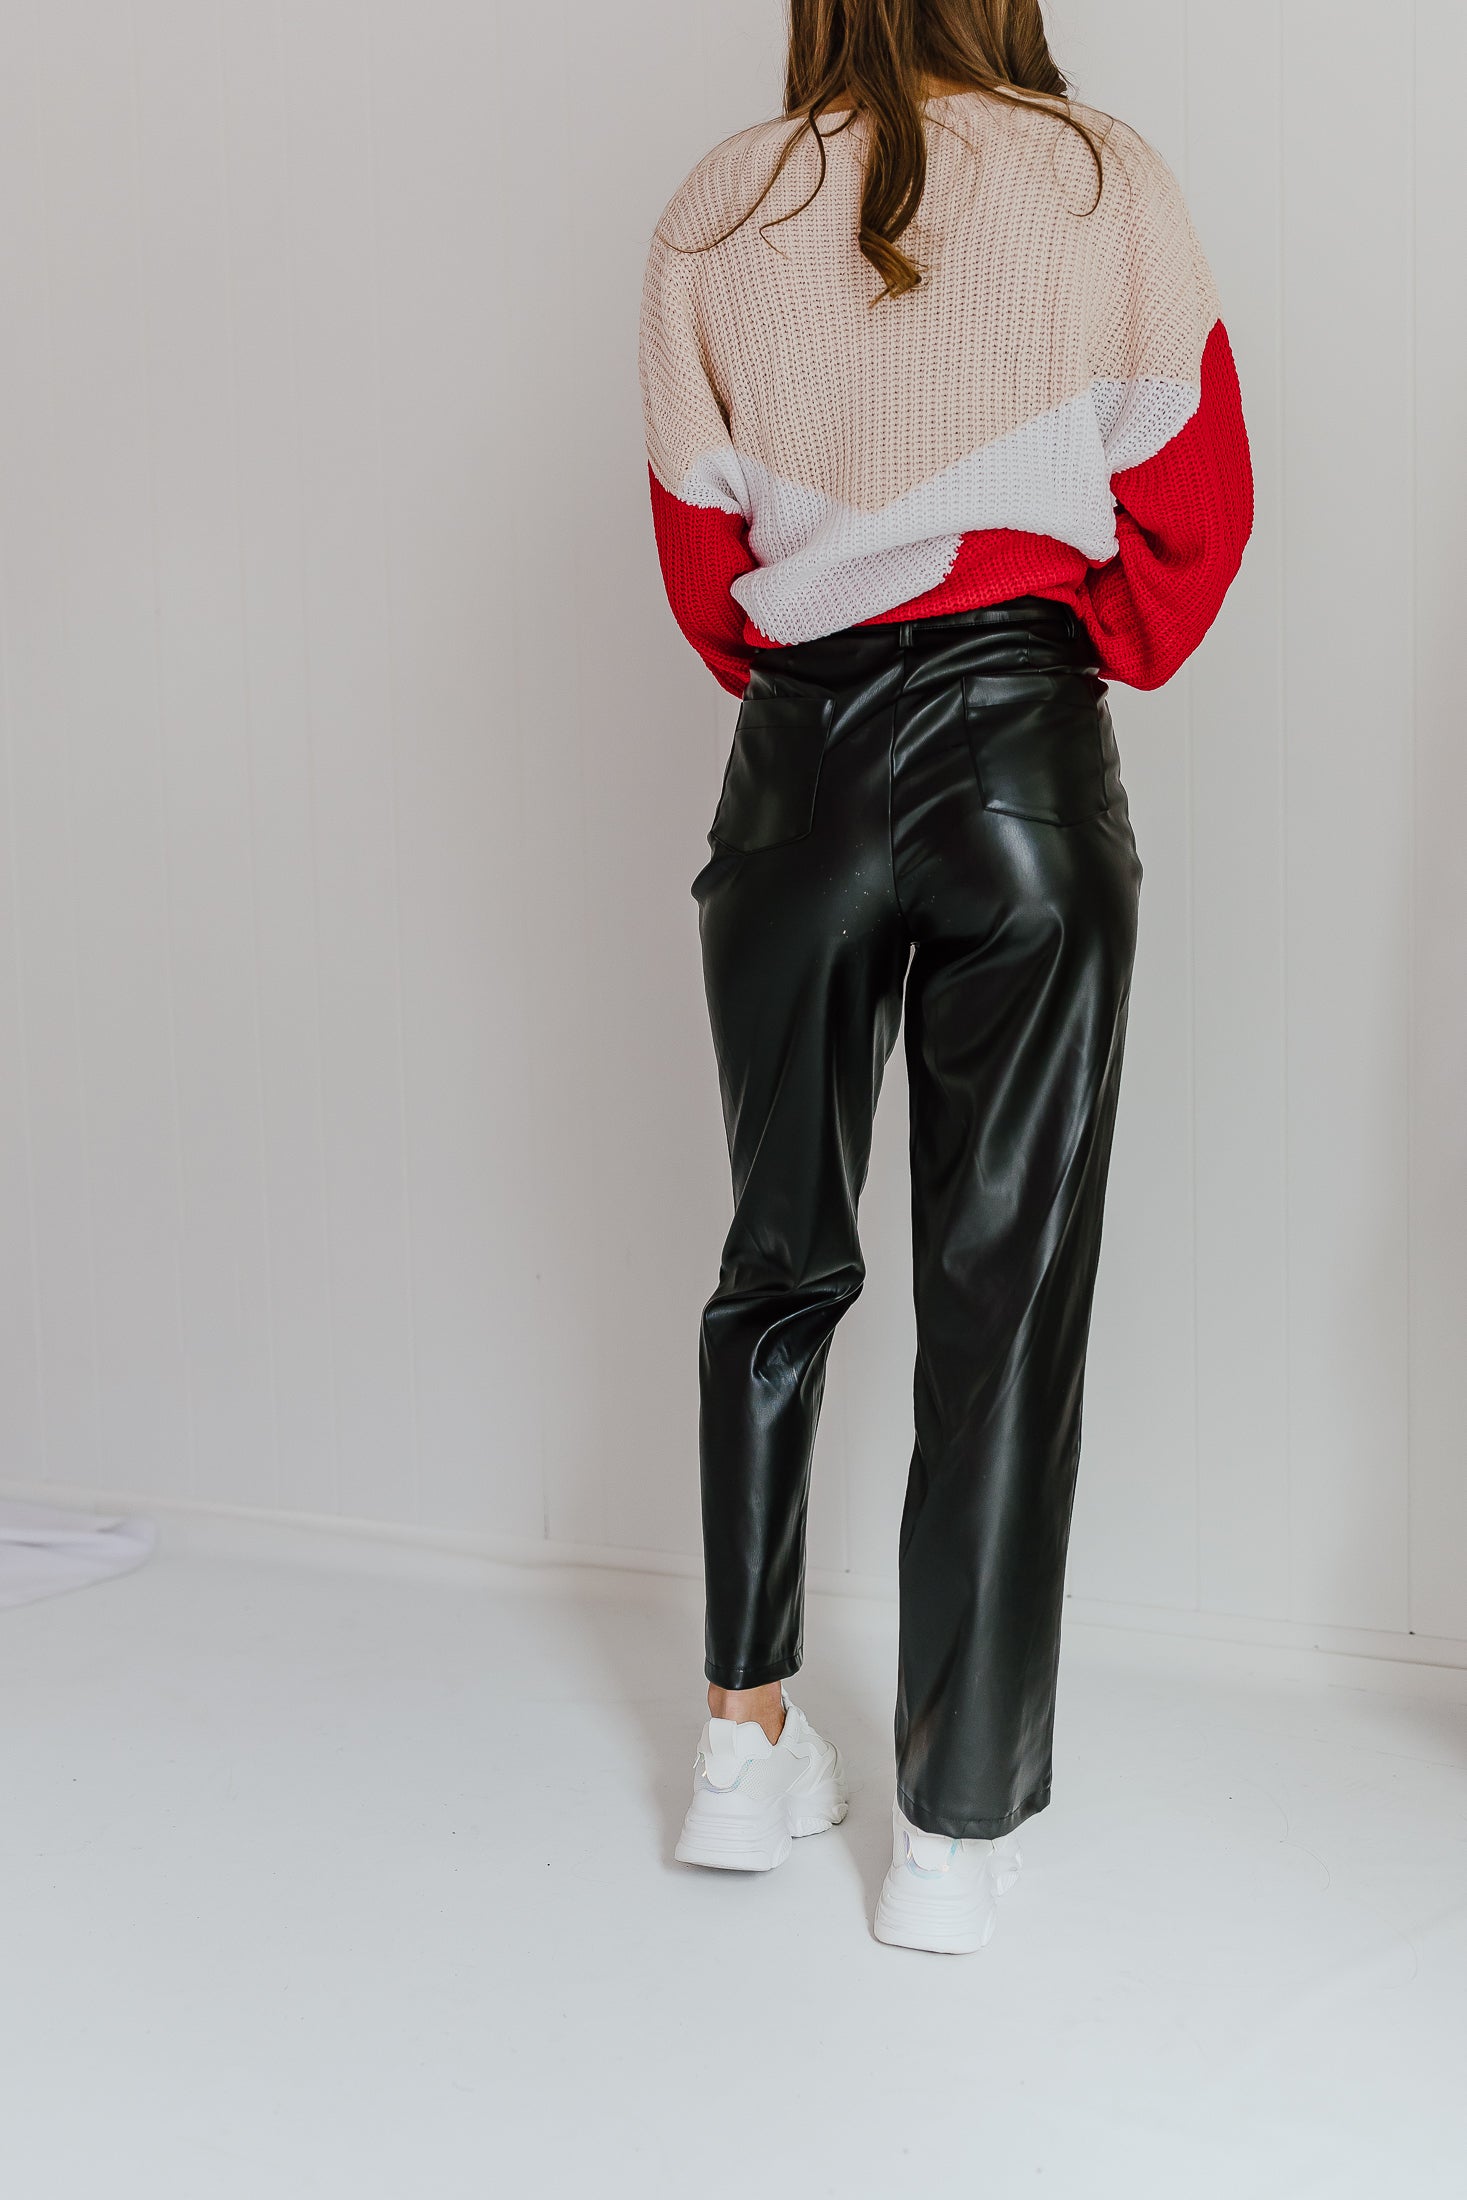 The Sprouse Crossover Faux Leather Pants – Adorabelles